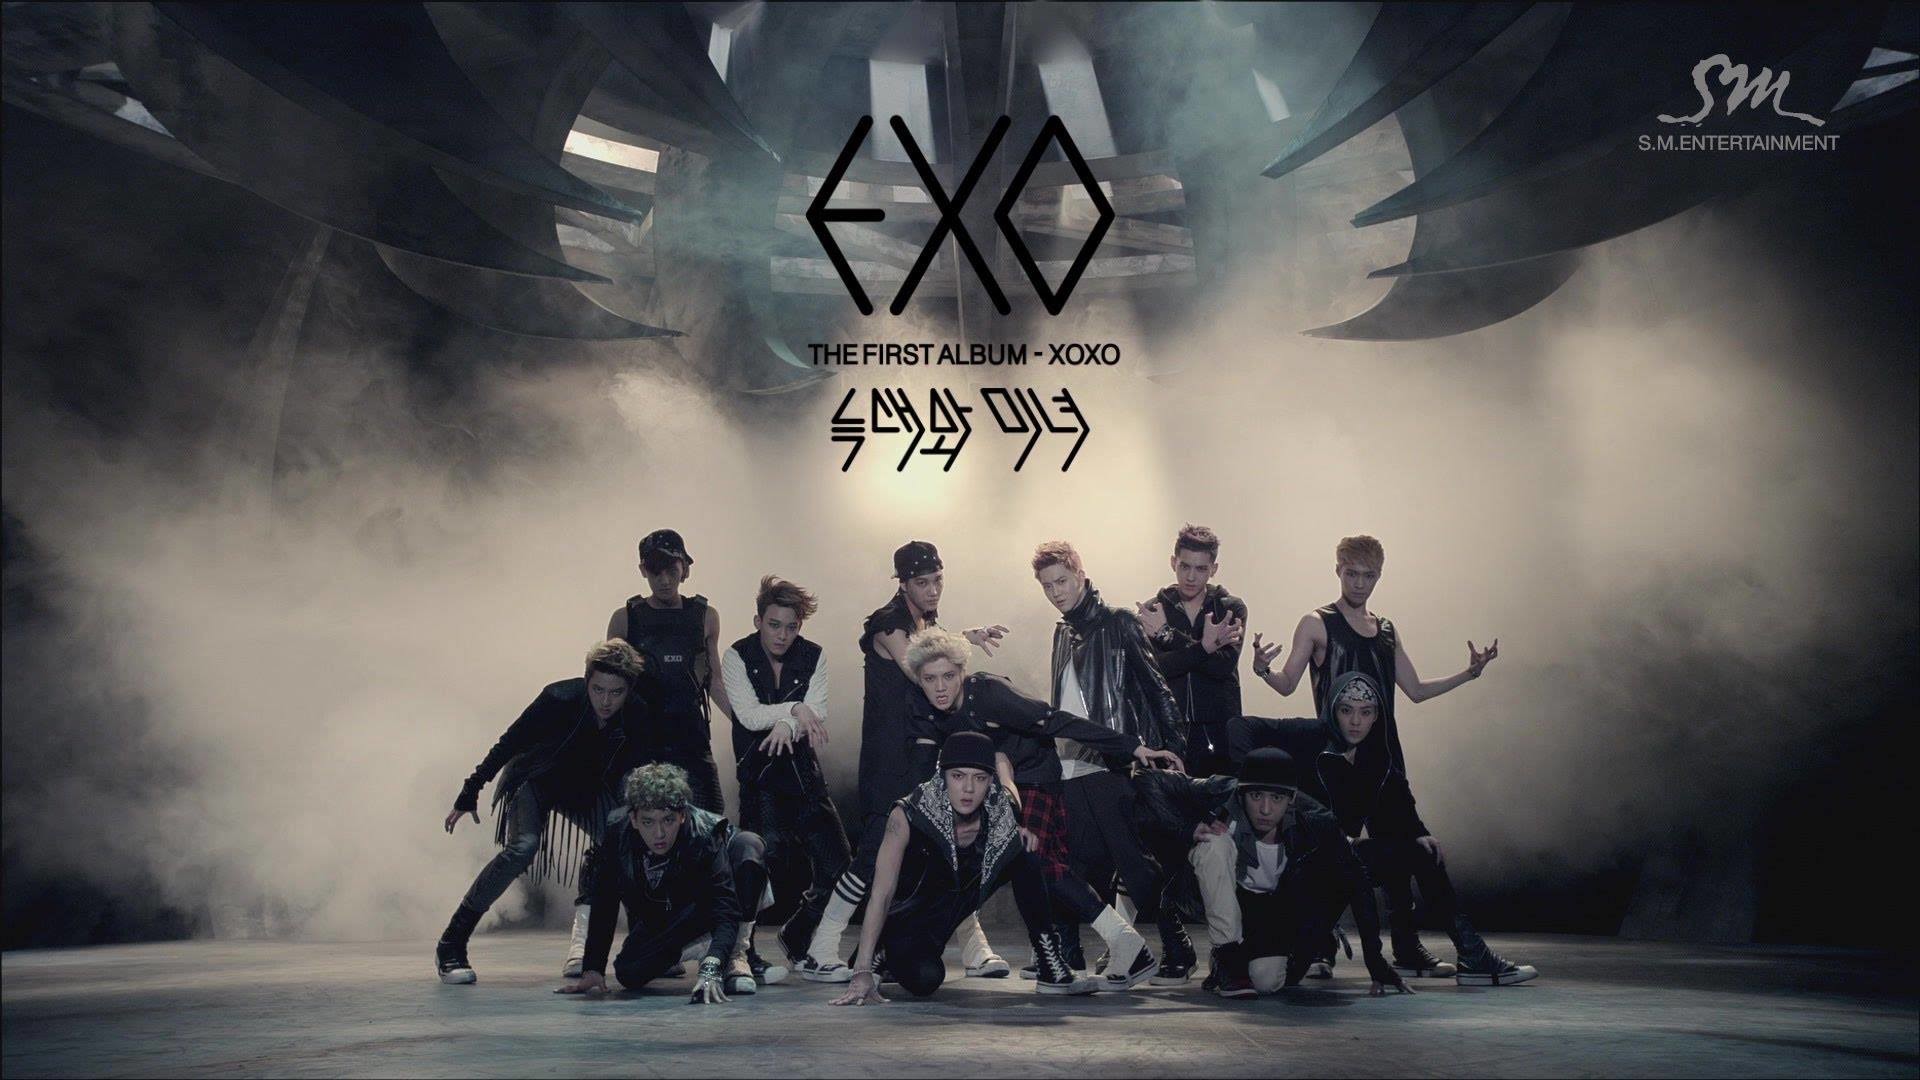 Exo Wallpaper Hd 82 Images